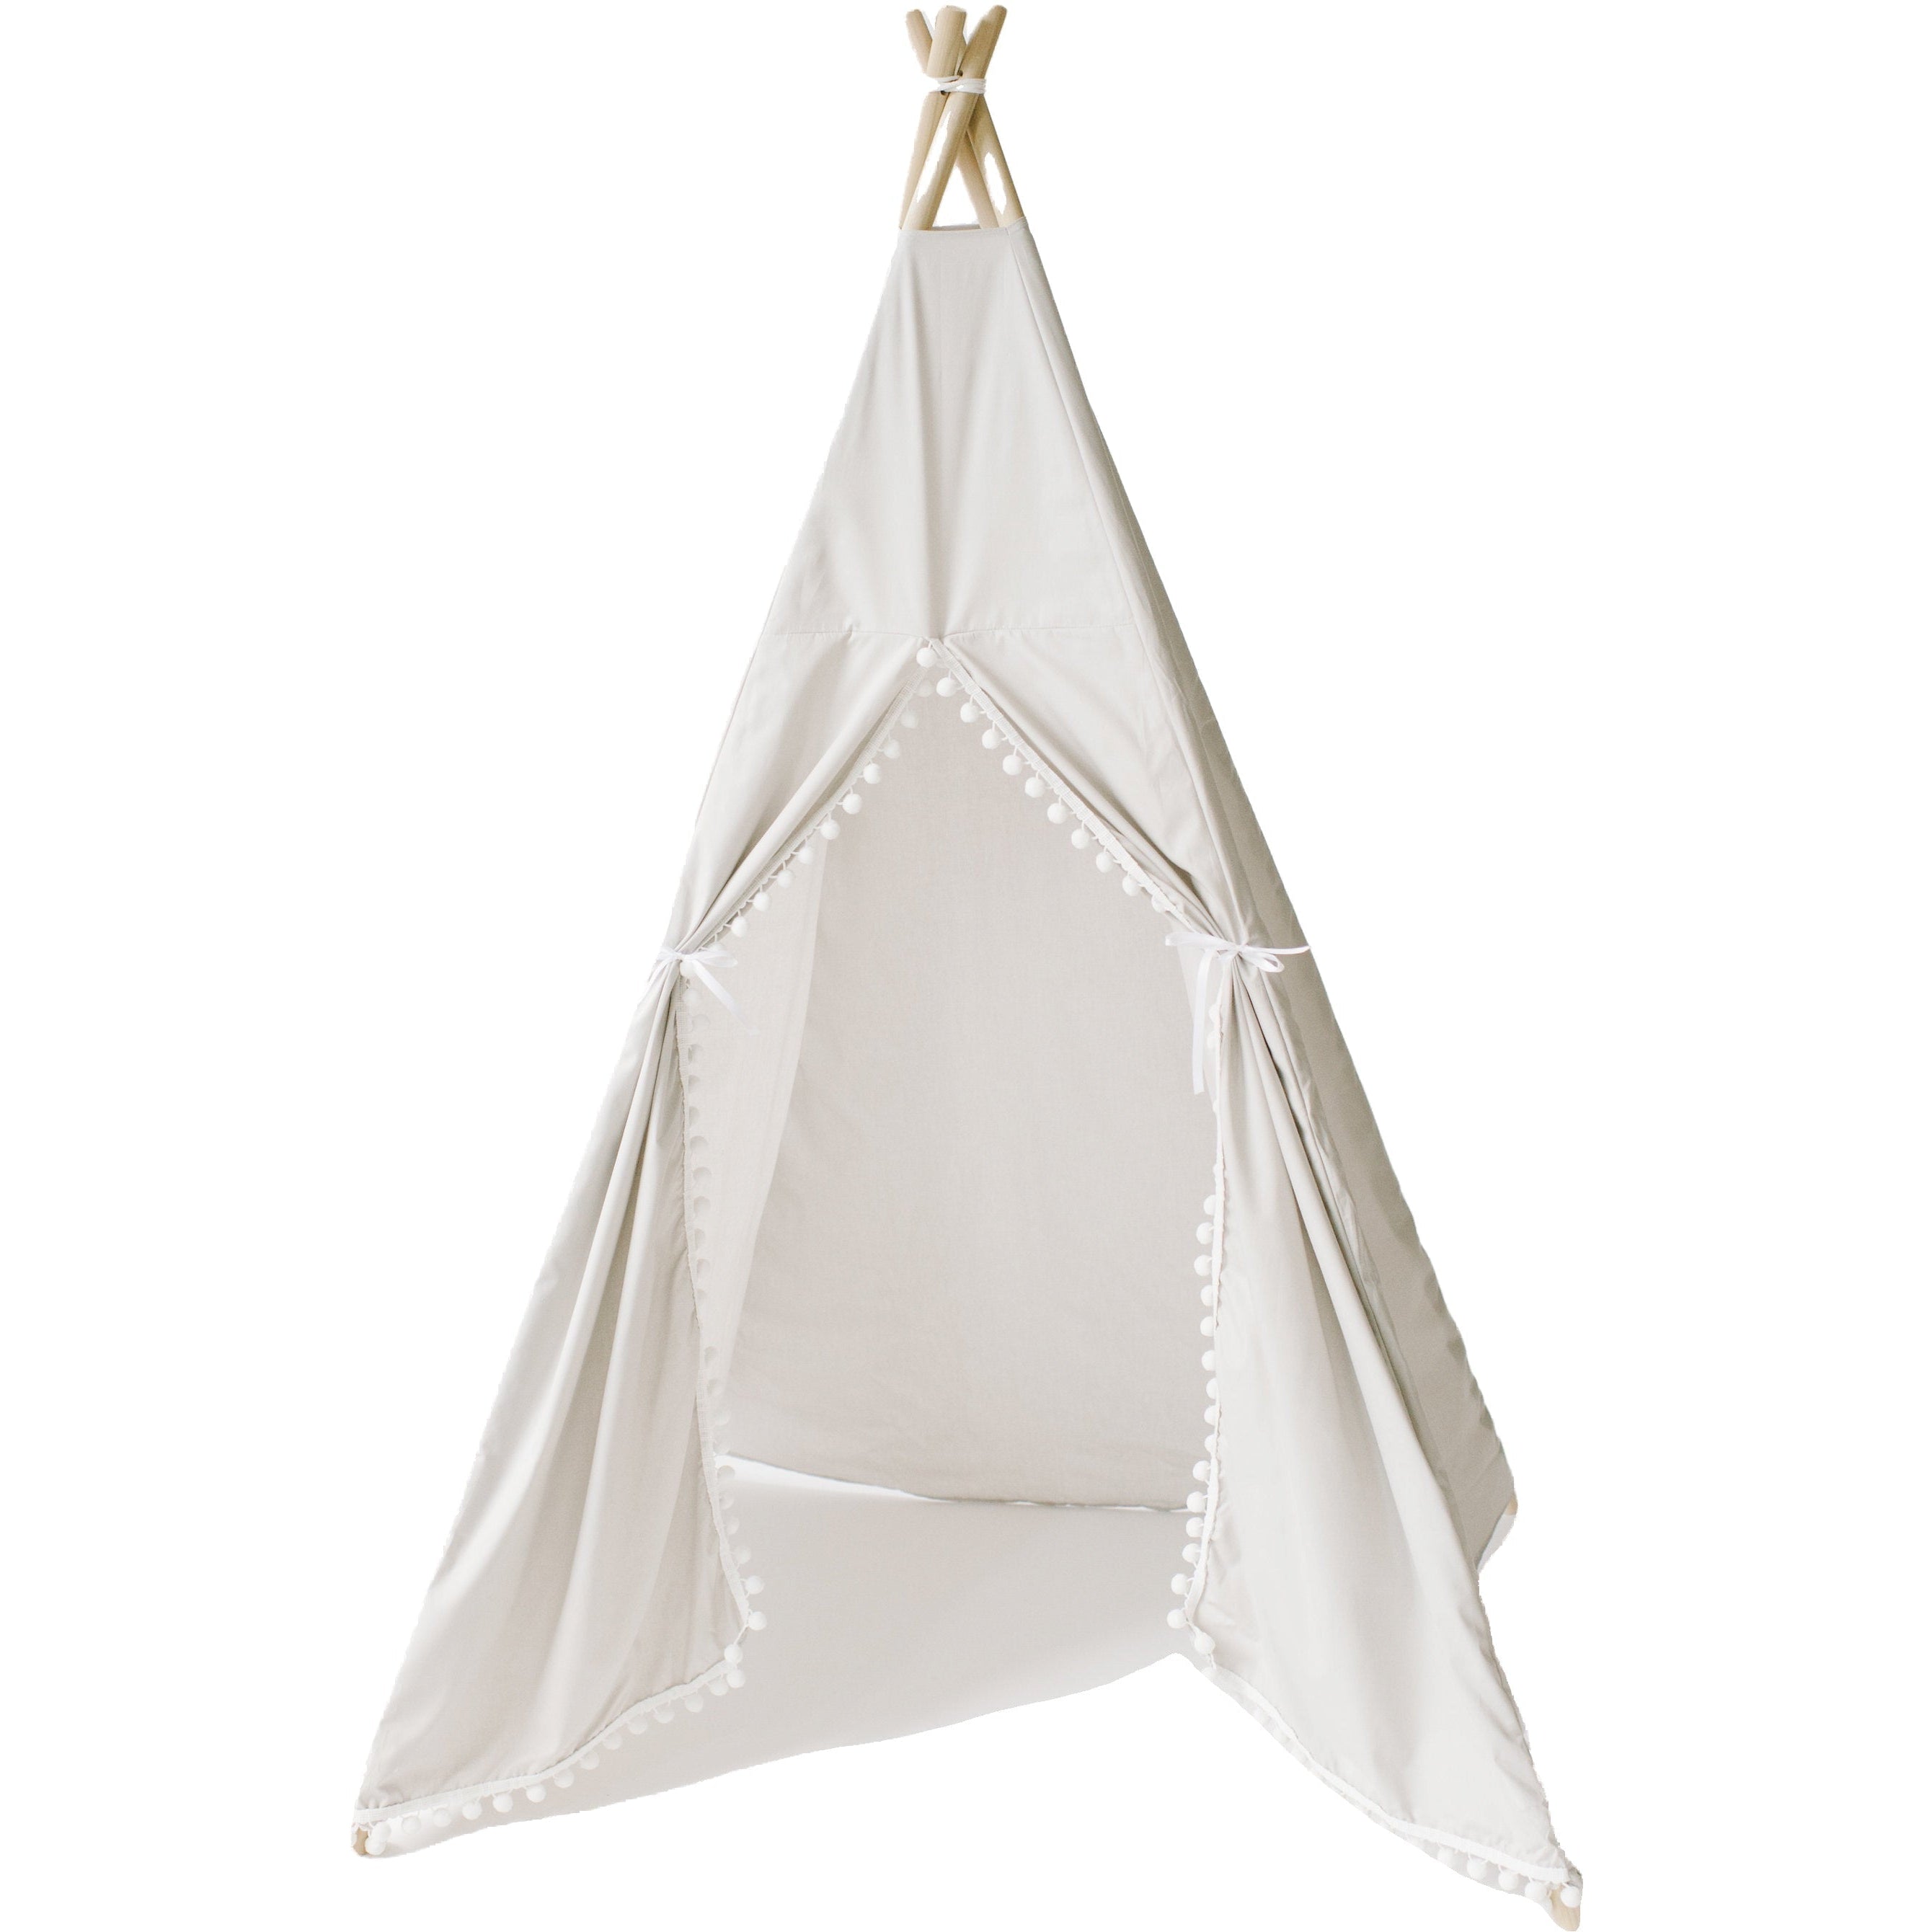 The Gray Play Tent